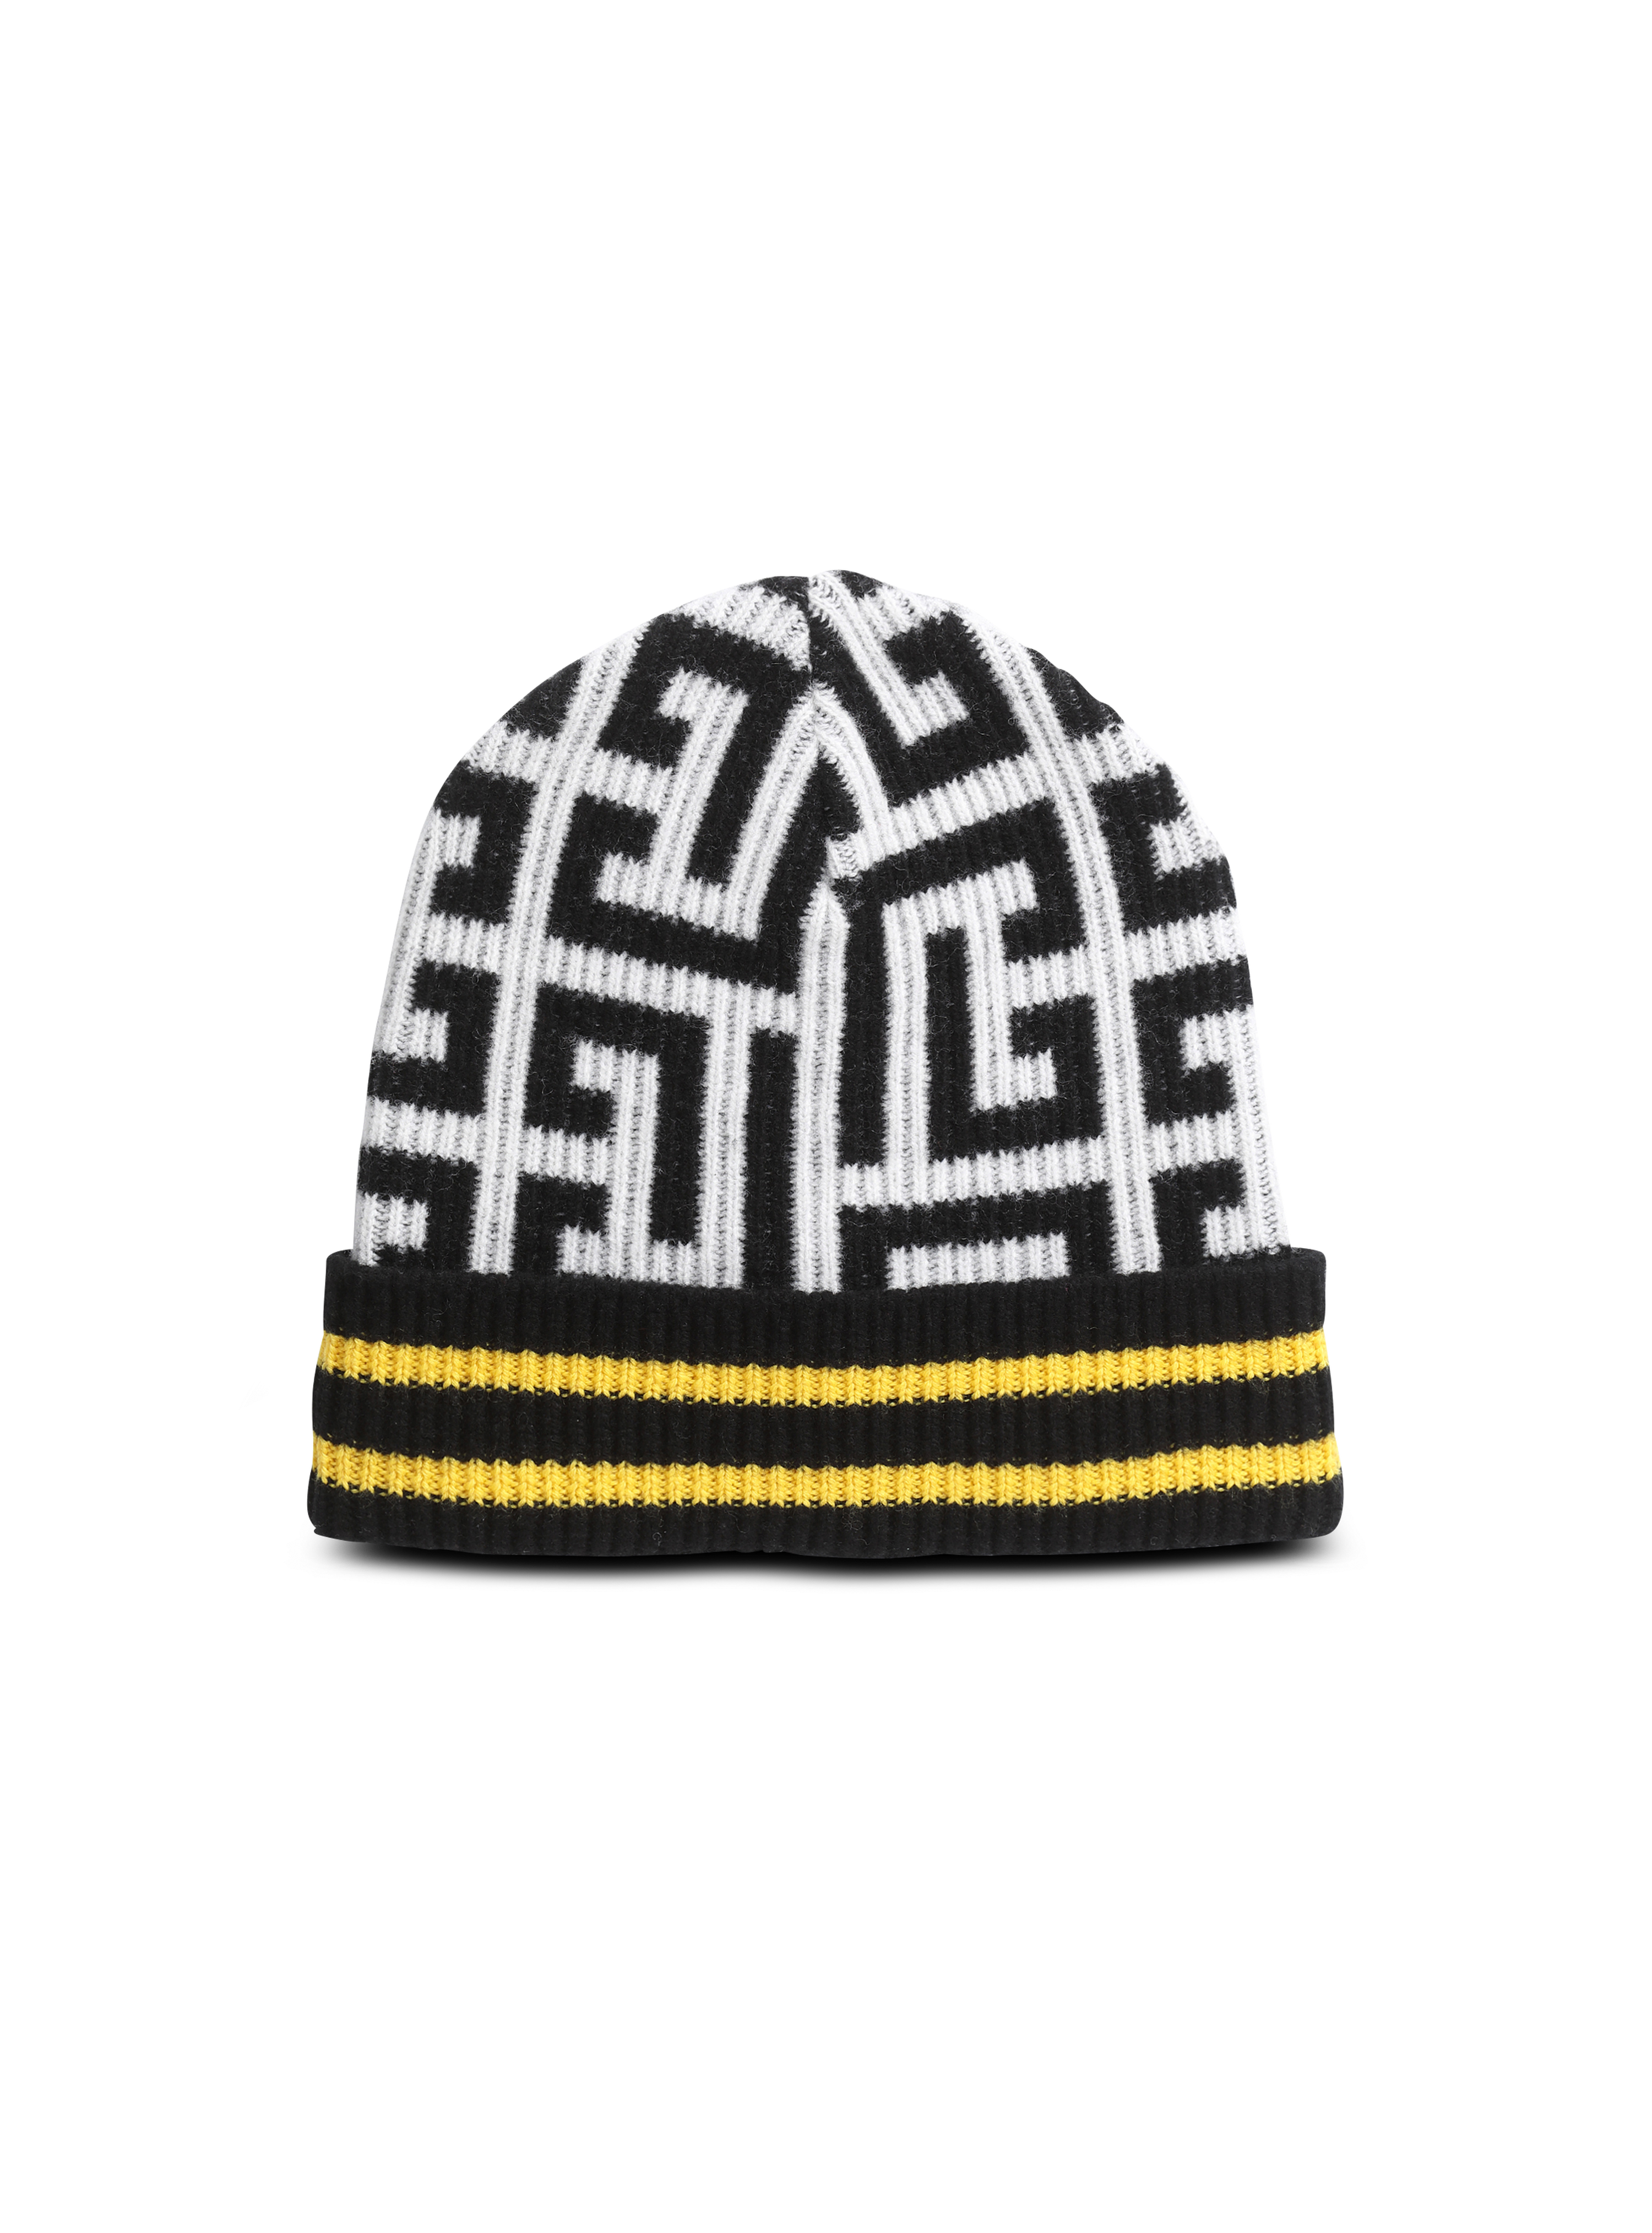 Embroidered wool hat with large Balmain monogram, yellow